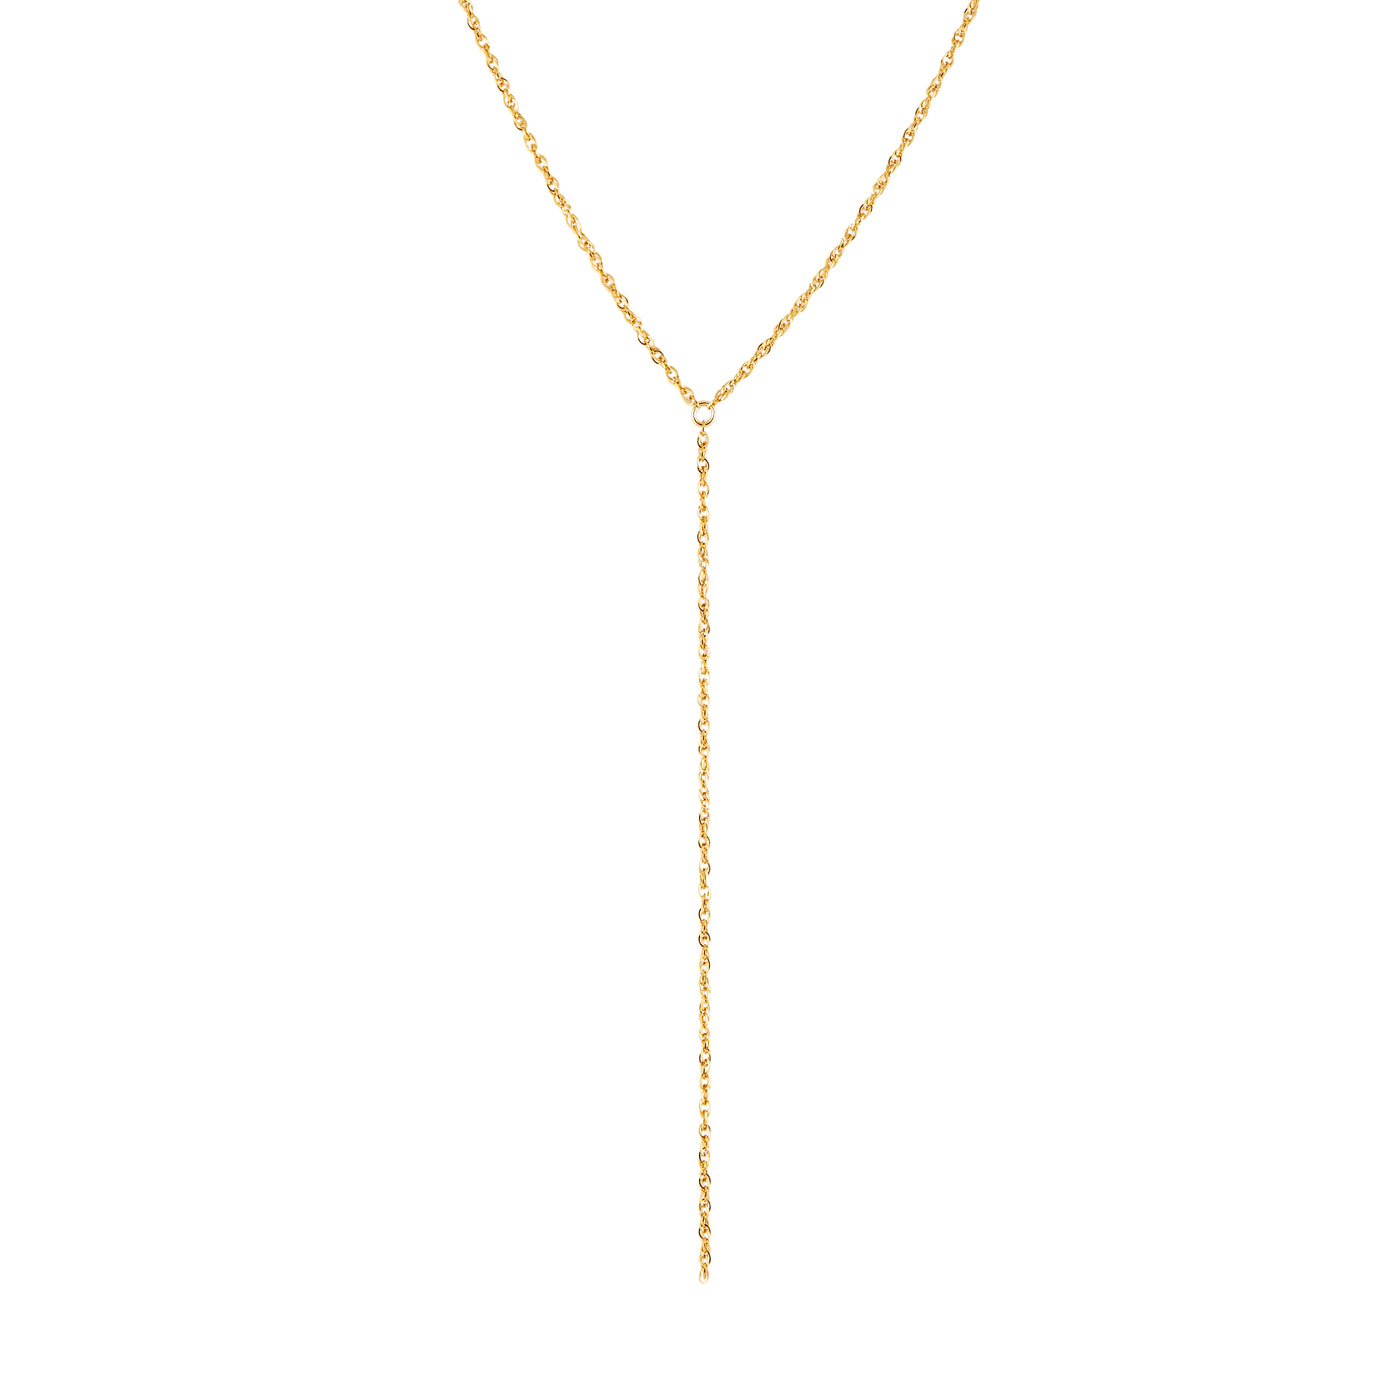 Illusion Necklace - Gold